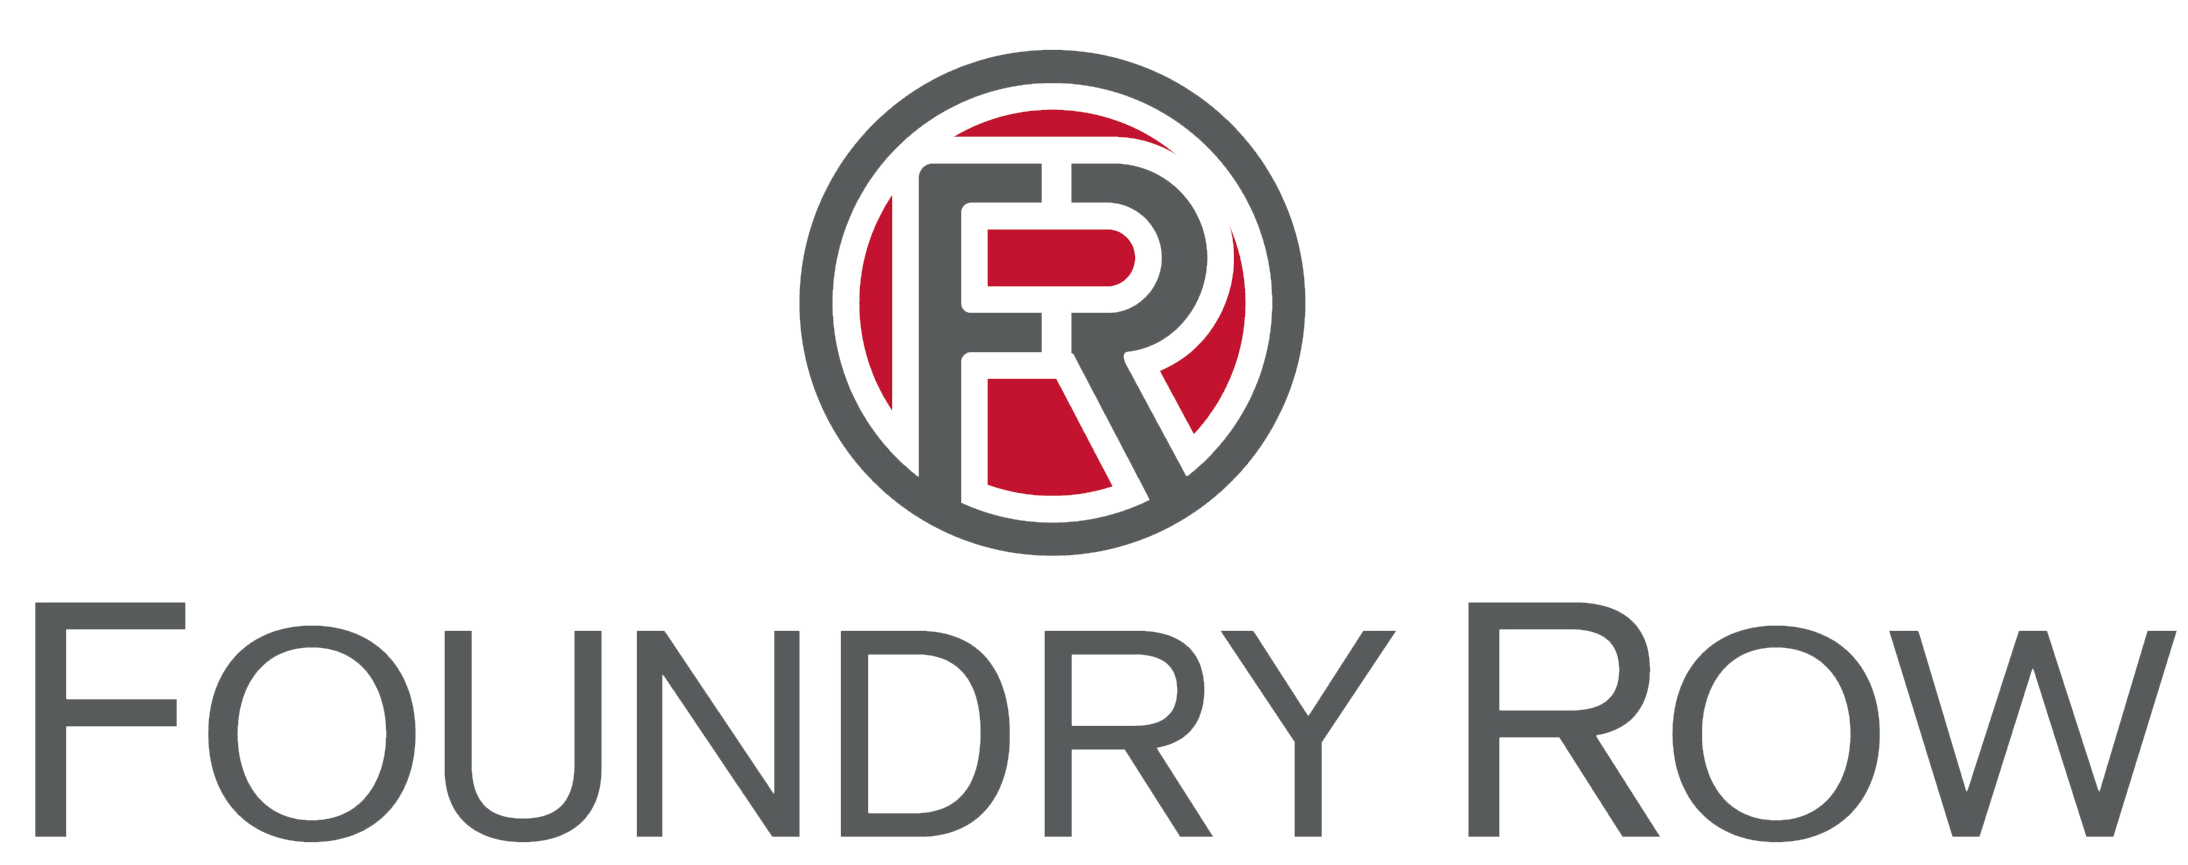 Foundry_Row_Logo_edited.png